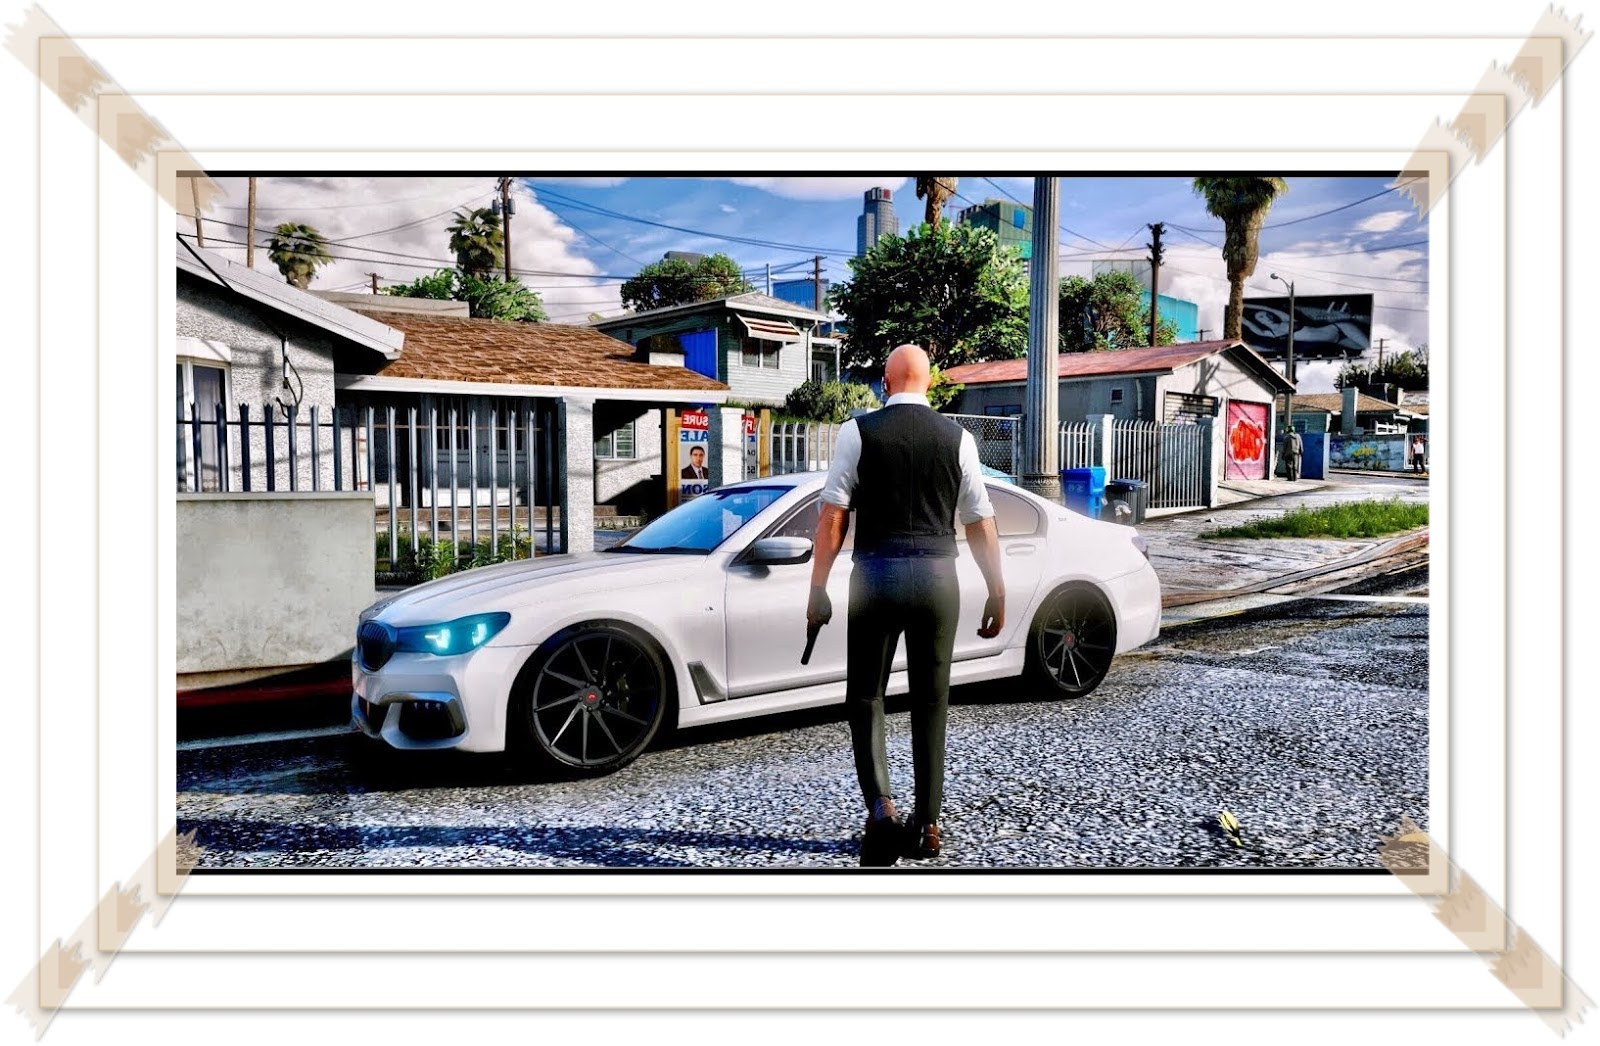 gta 5 pc free download 2019 with mod